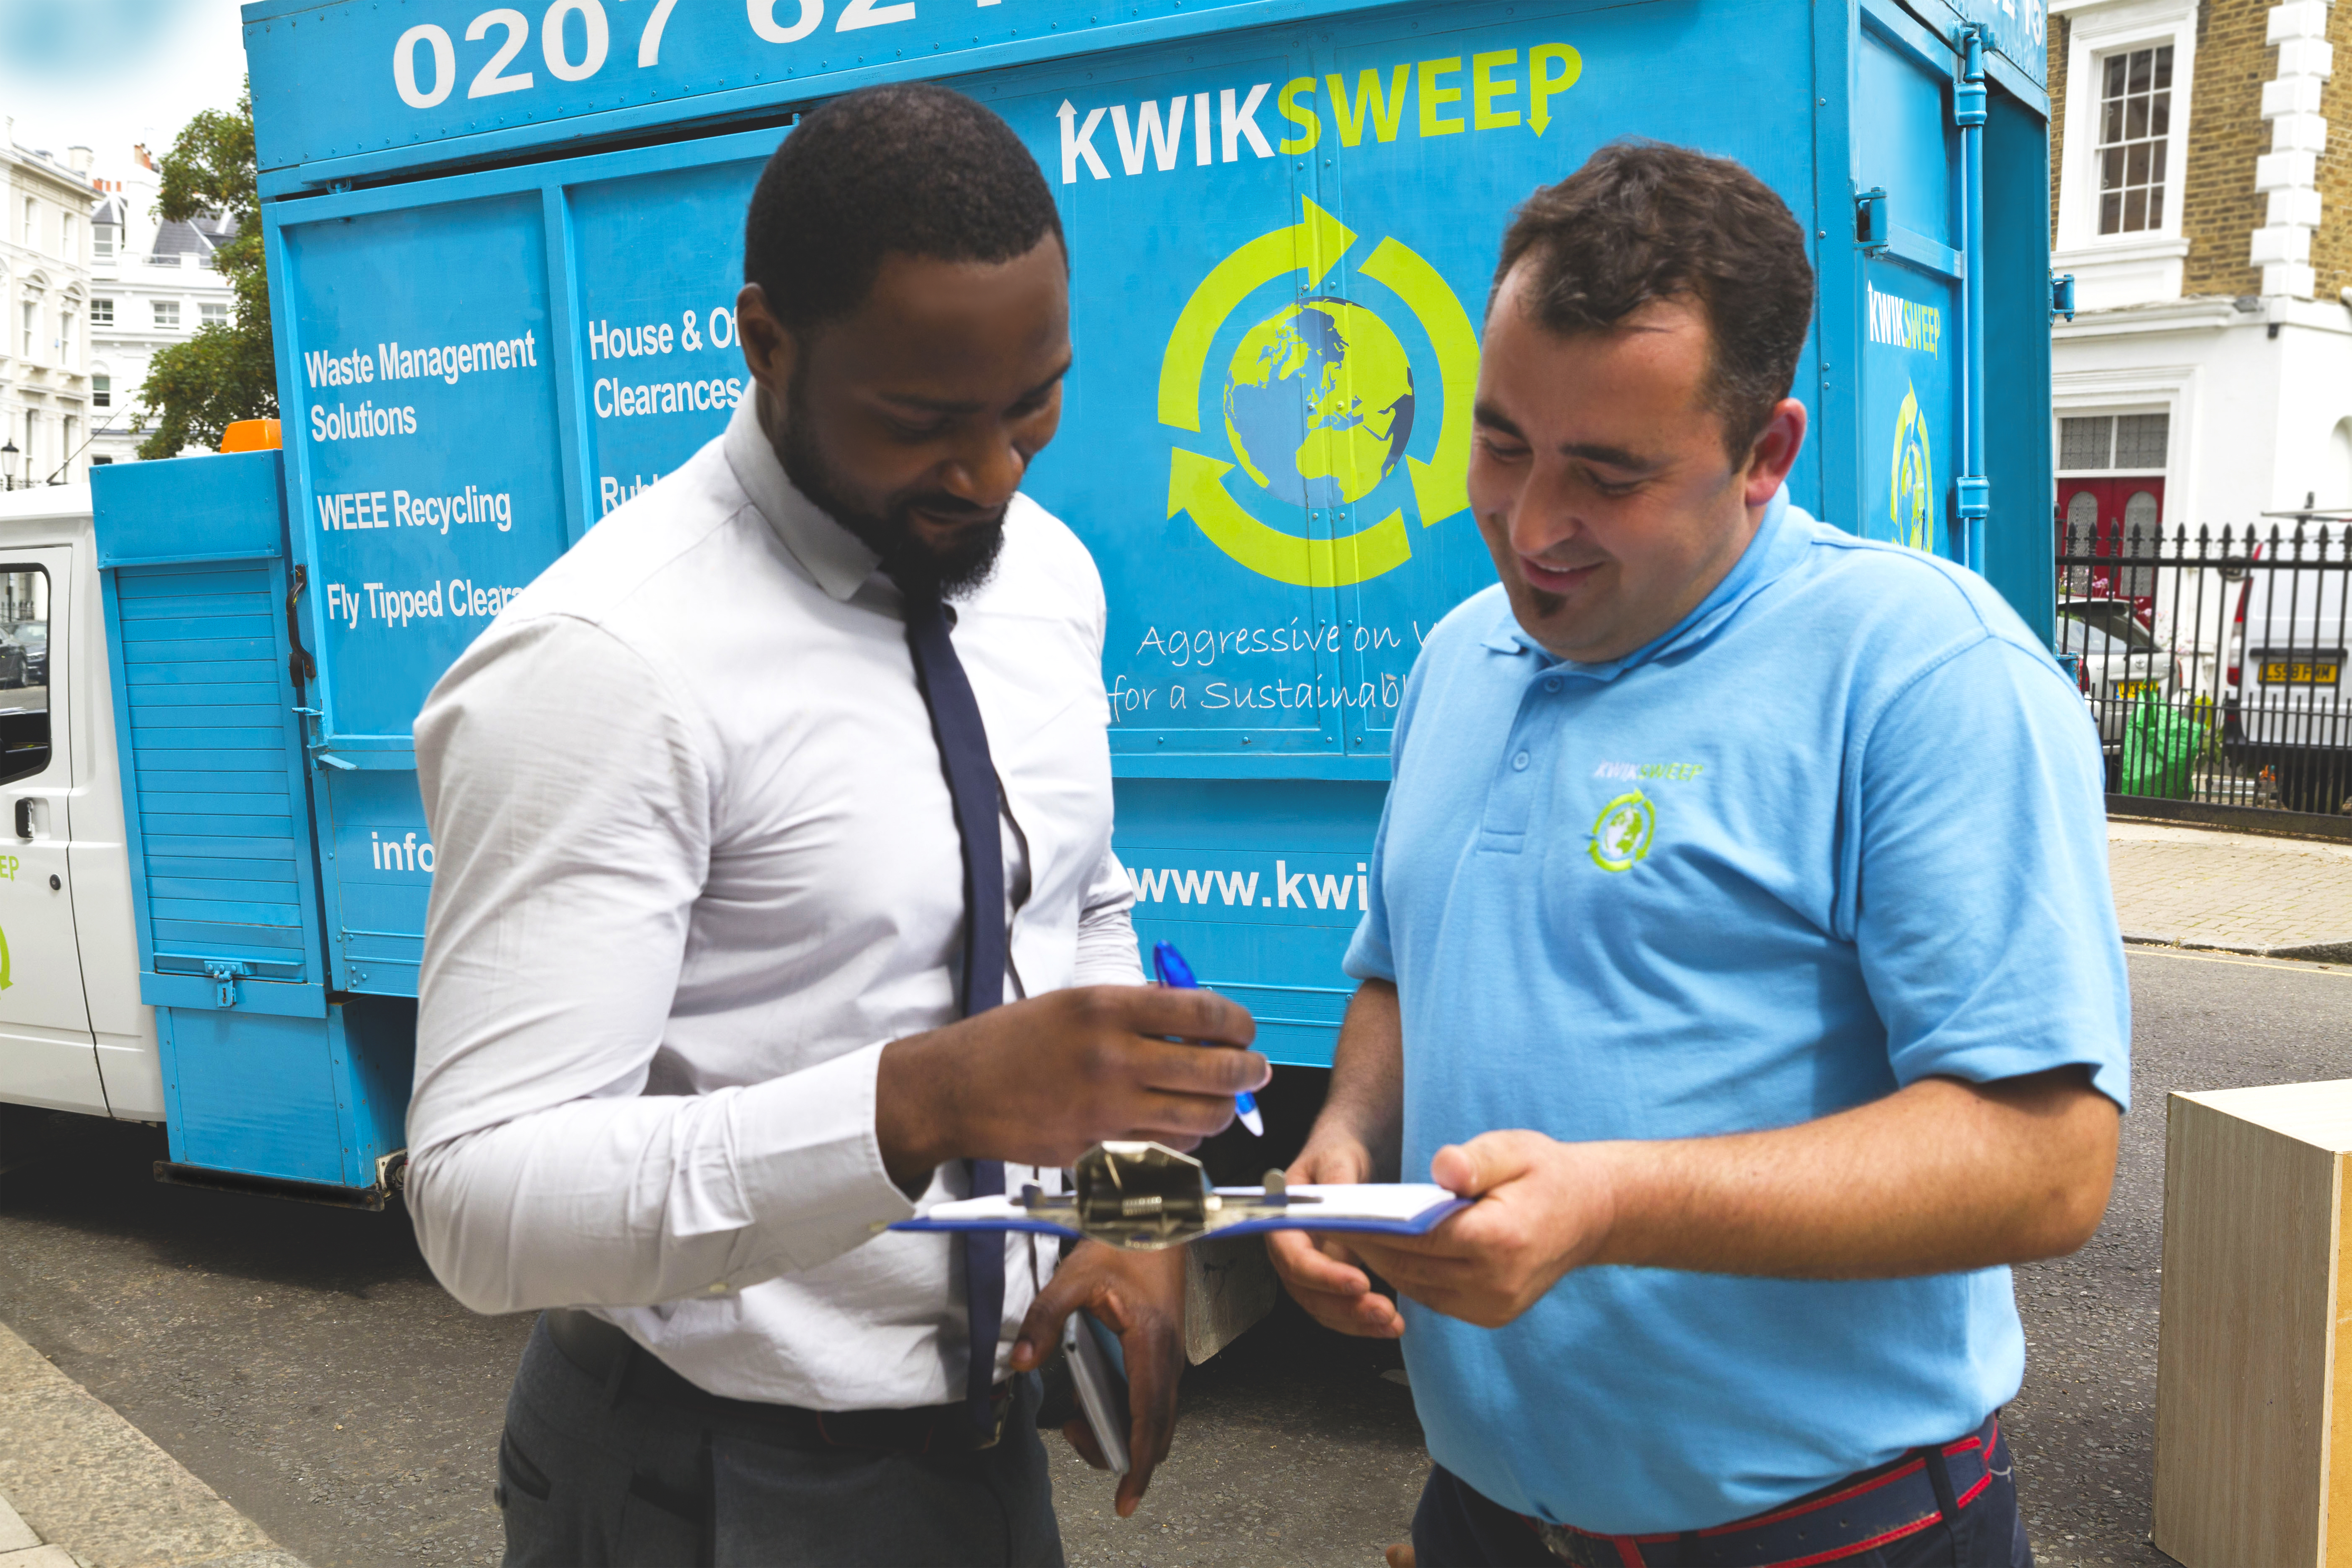 Kwiksweep Is The Best For Summer Waste Clearances